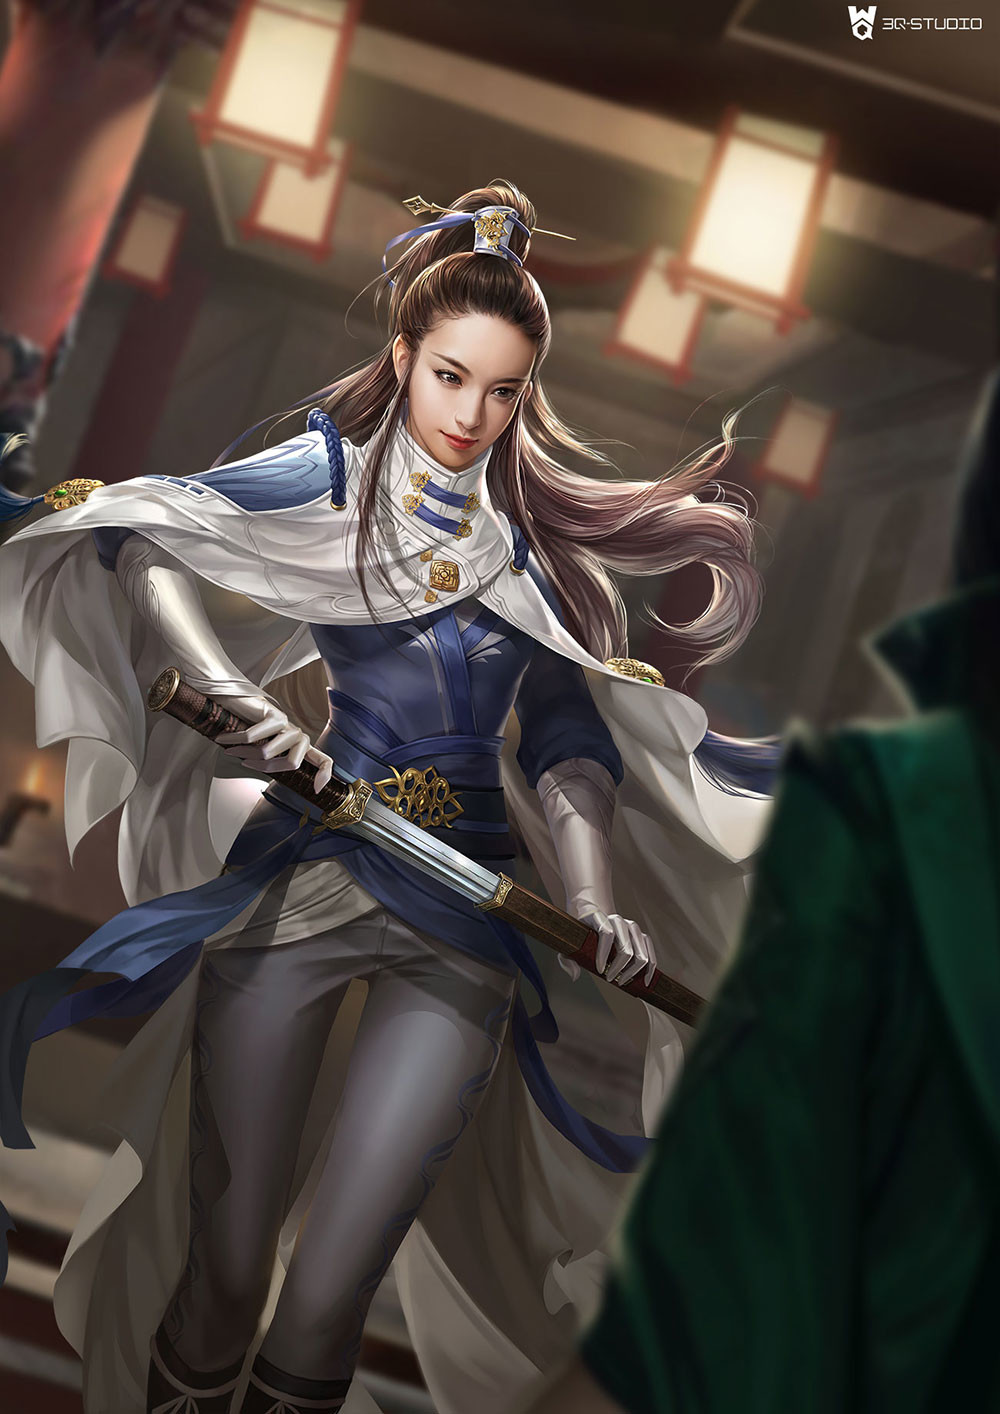 General 1000x1414 3Q Studio women brunette long hair ponytail hair accessories looking away smiling warrior cape blue clothing white clothing dress pants weapon gloves sword